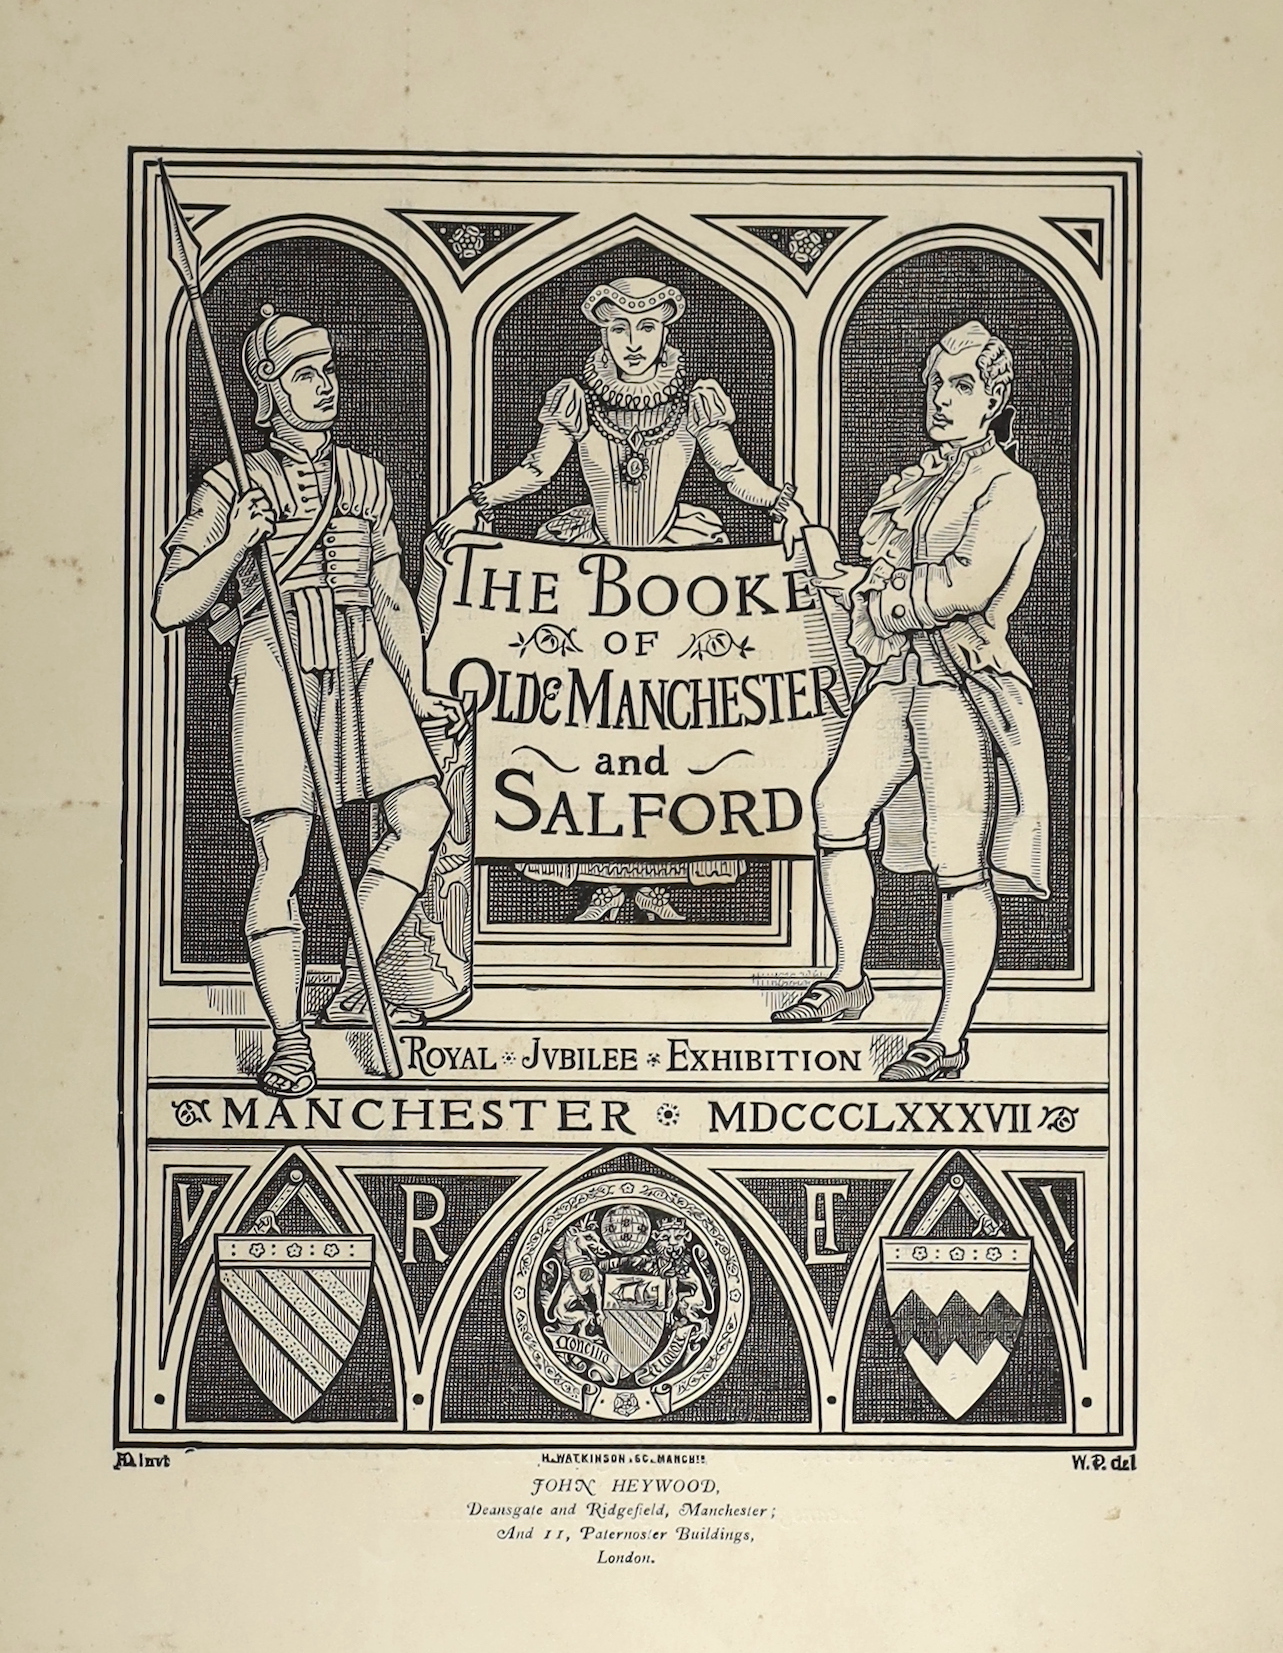 Derbyshire, Alfred - A Booke of Olde Manchester and Salford....Large Paper Limited Edition (of 250 numbered copies). frontis. folded facsimile of Buck's 1728 panorama and num. illus. (some full page), subscribers' list;